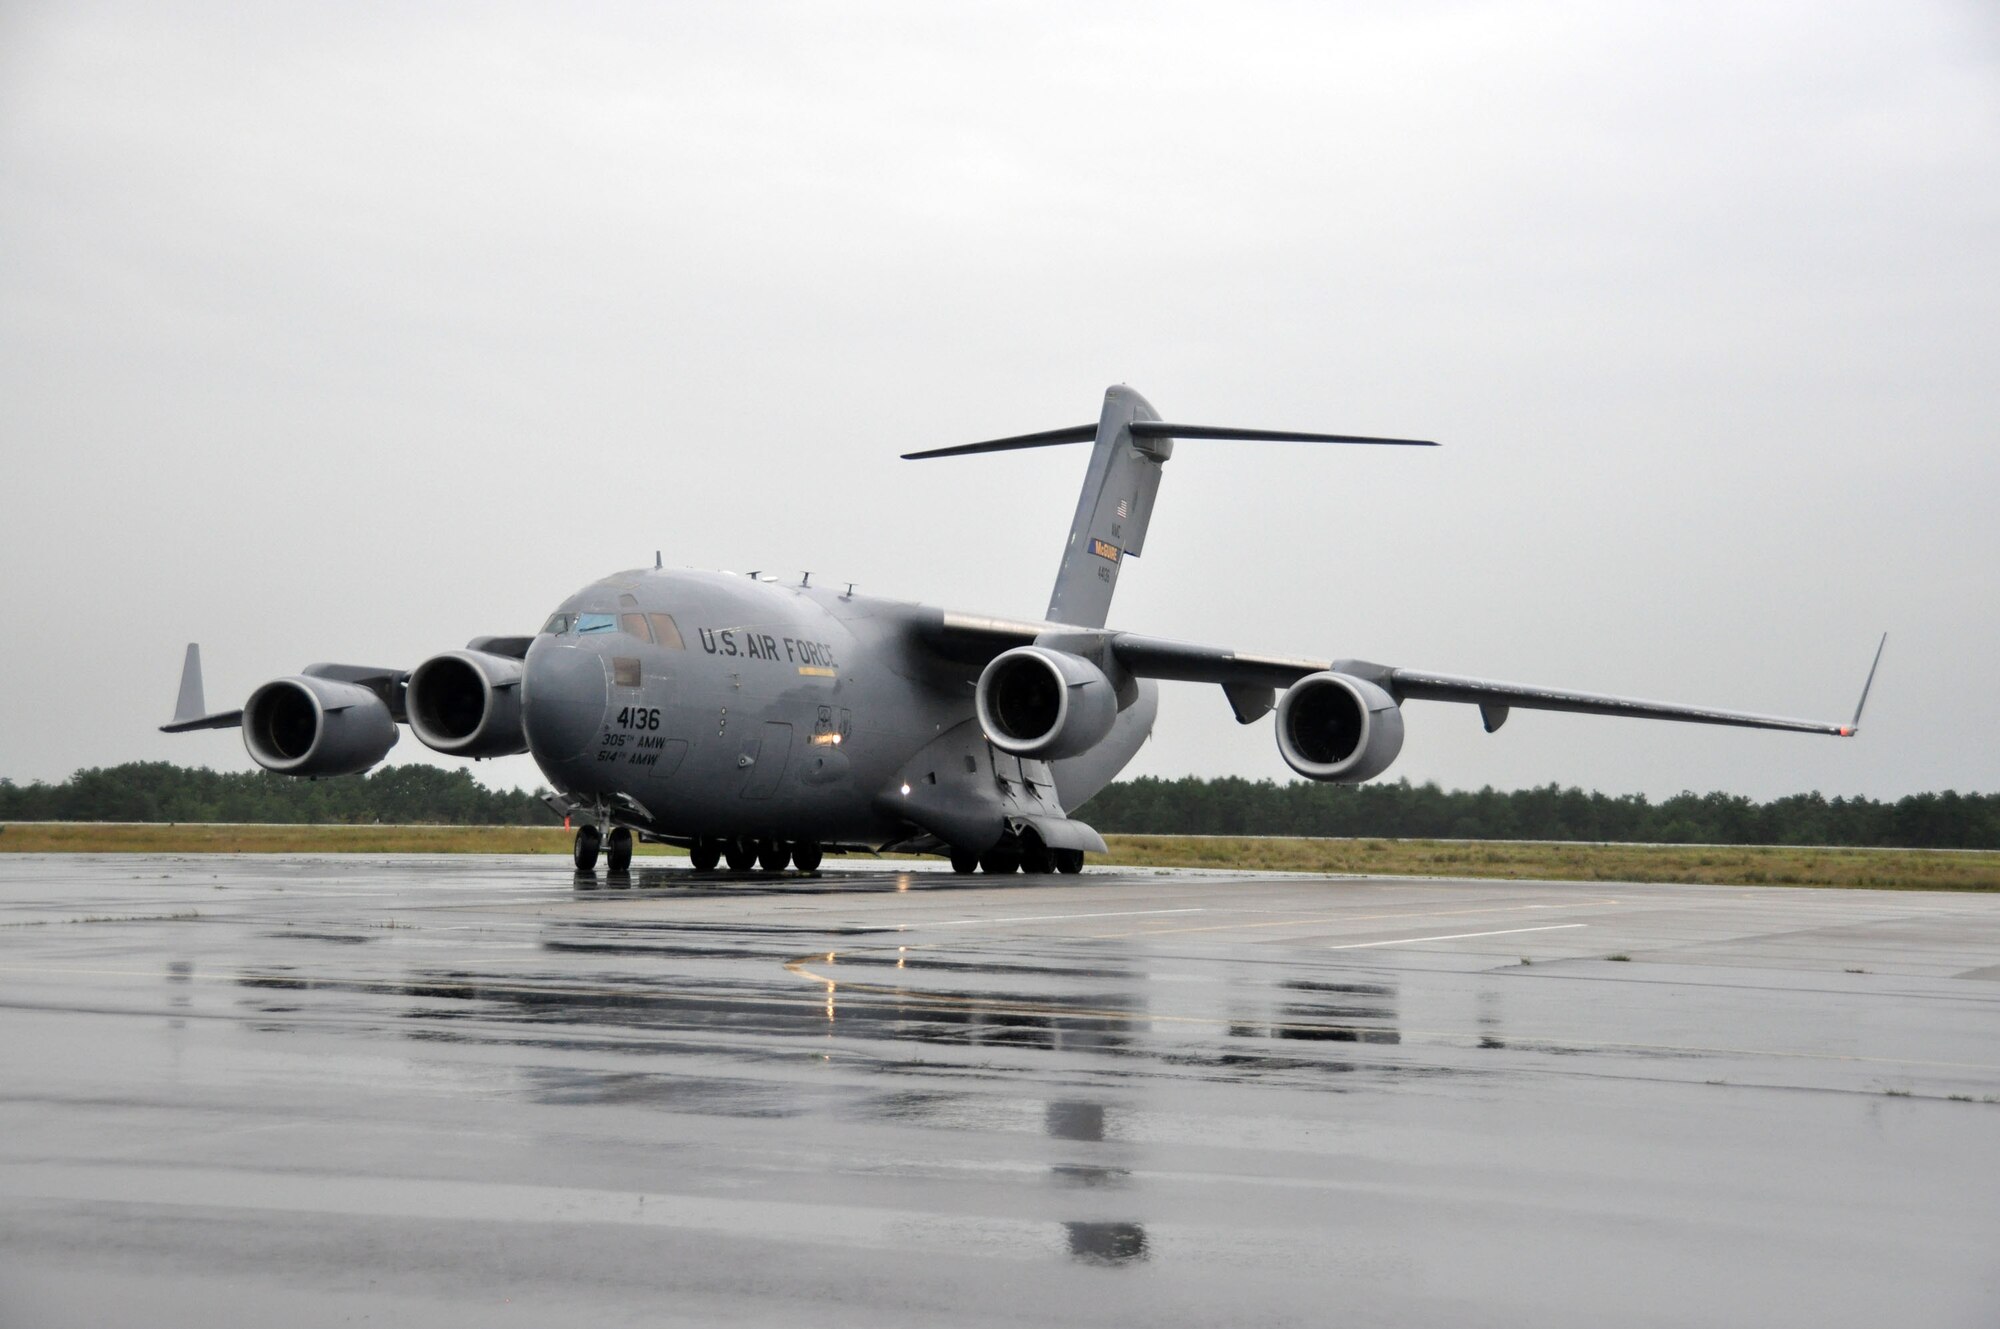 A C-17 Globemaster III from the 305th Air Mobility Wing at McGuire Air Force Base, N.J., taxies on the runway at the Lakehurst Naval Air Station. The aircraft delivered cargo to Airmen and Soldiers with Joint Task Force-Port Opening, who are conducting a training exercise designed to test their ability to open and operate a deployed aerial port and forward supply node. (U.S. Air Force photo/Capt. Dustin Doyle)